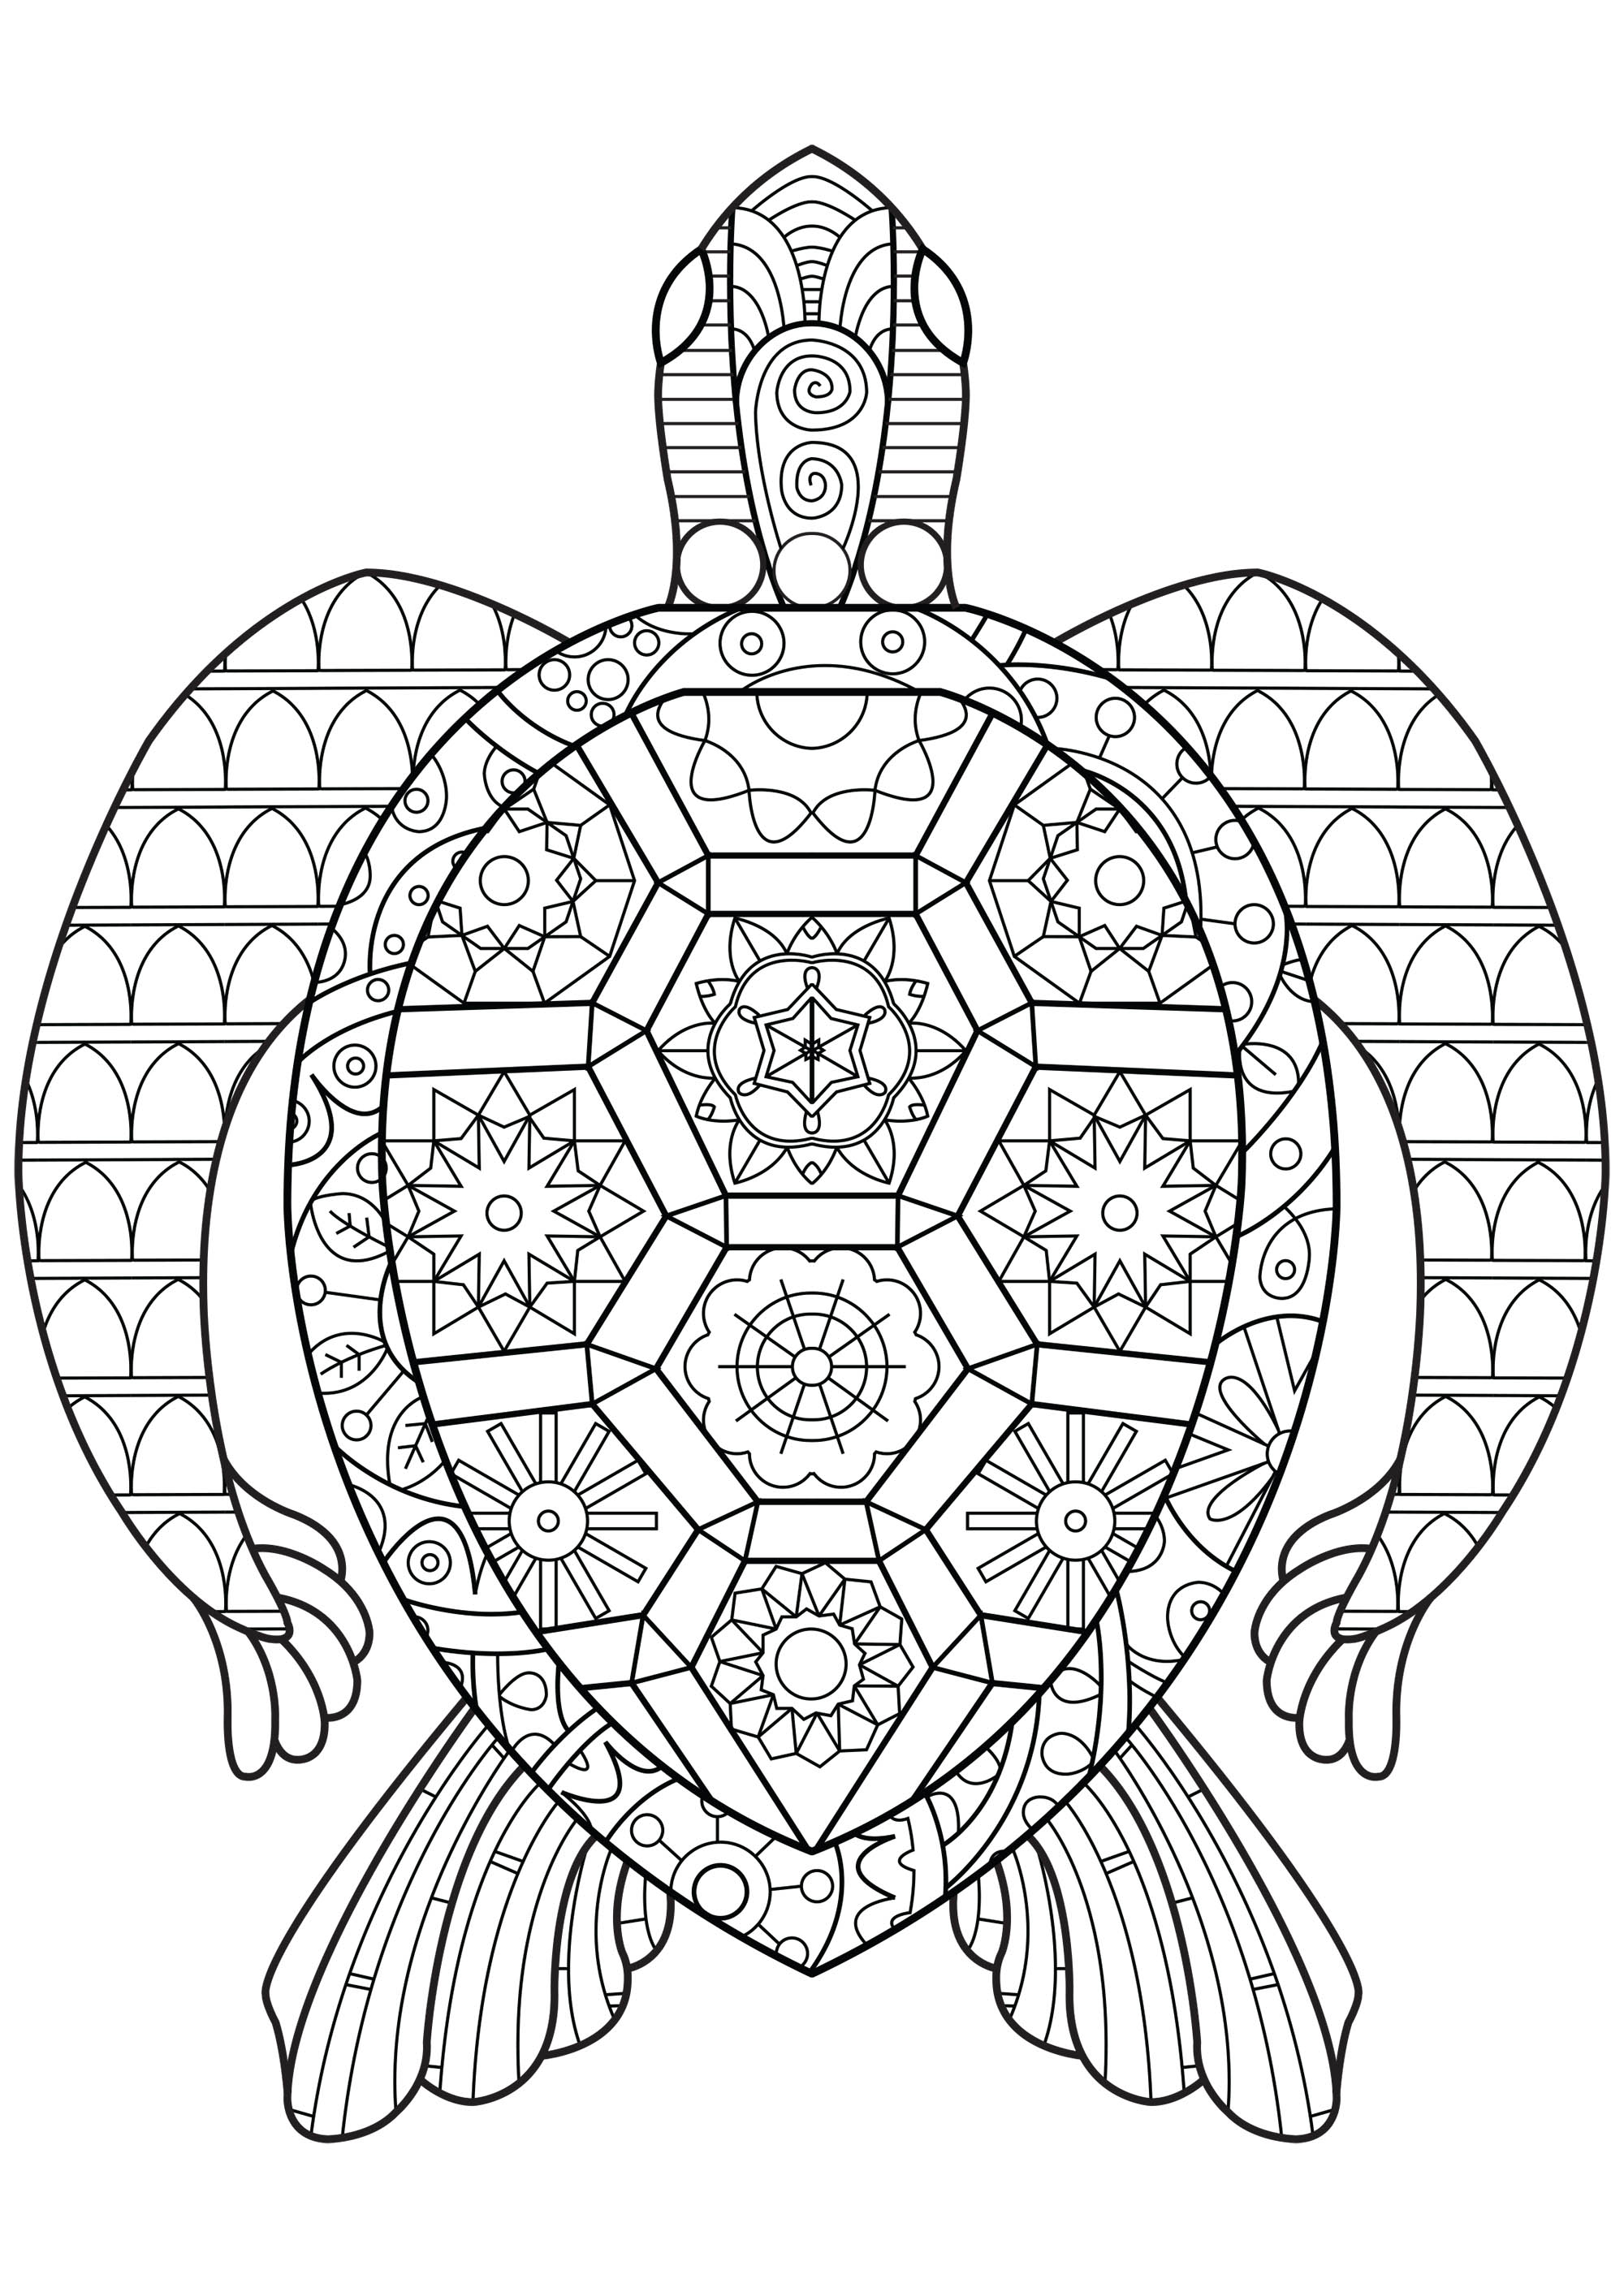 Turtle with geometric shapes